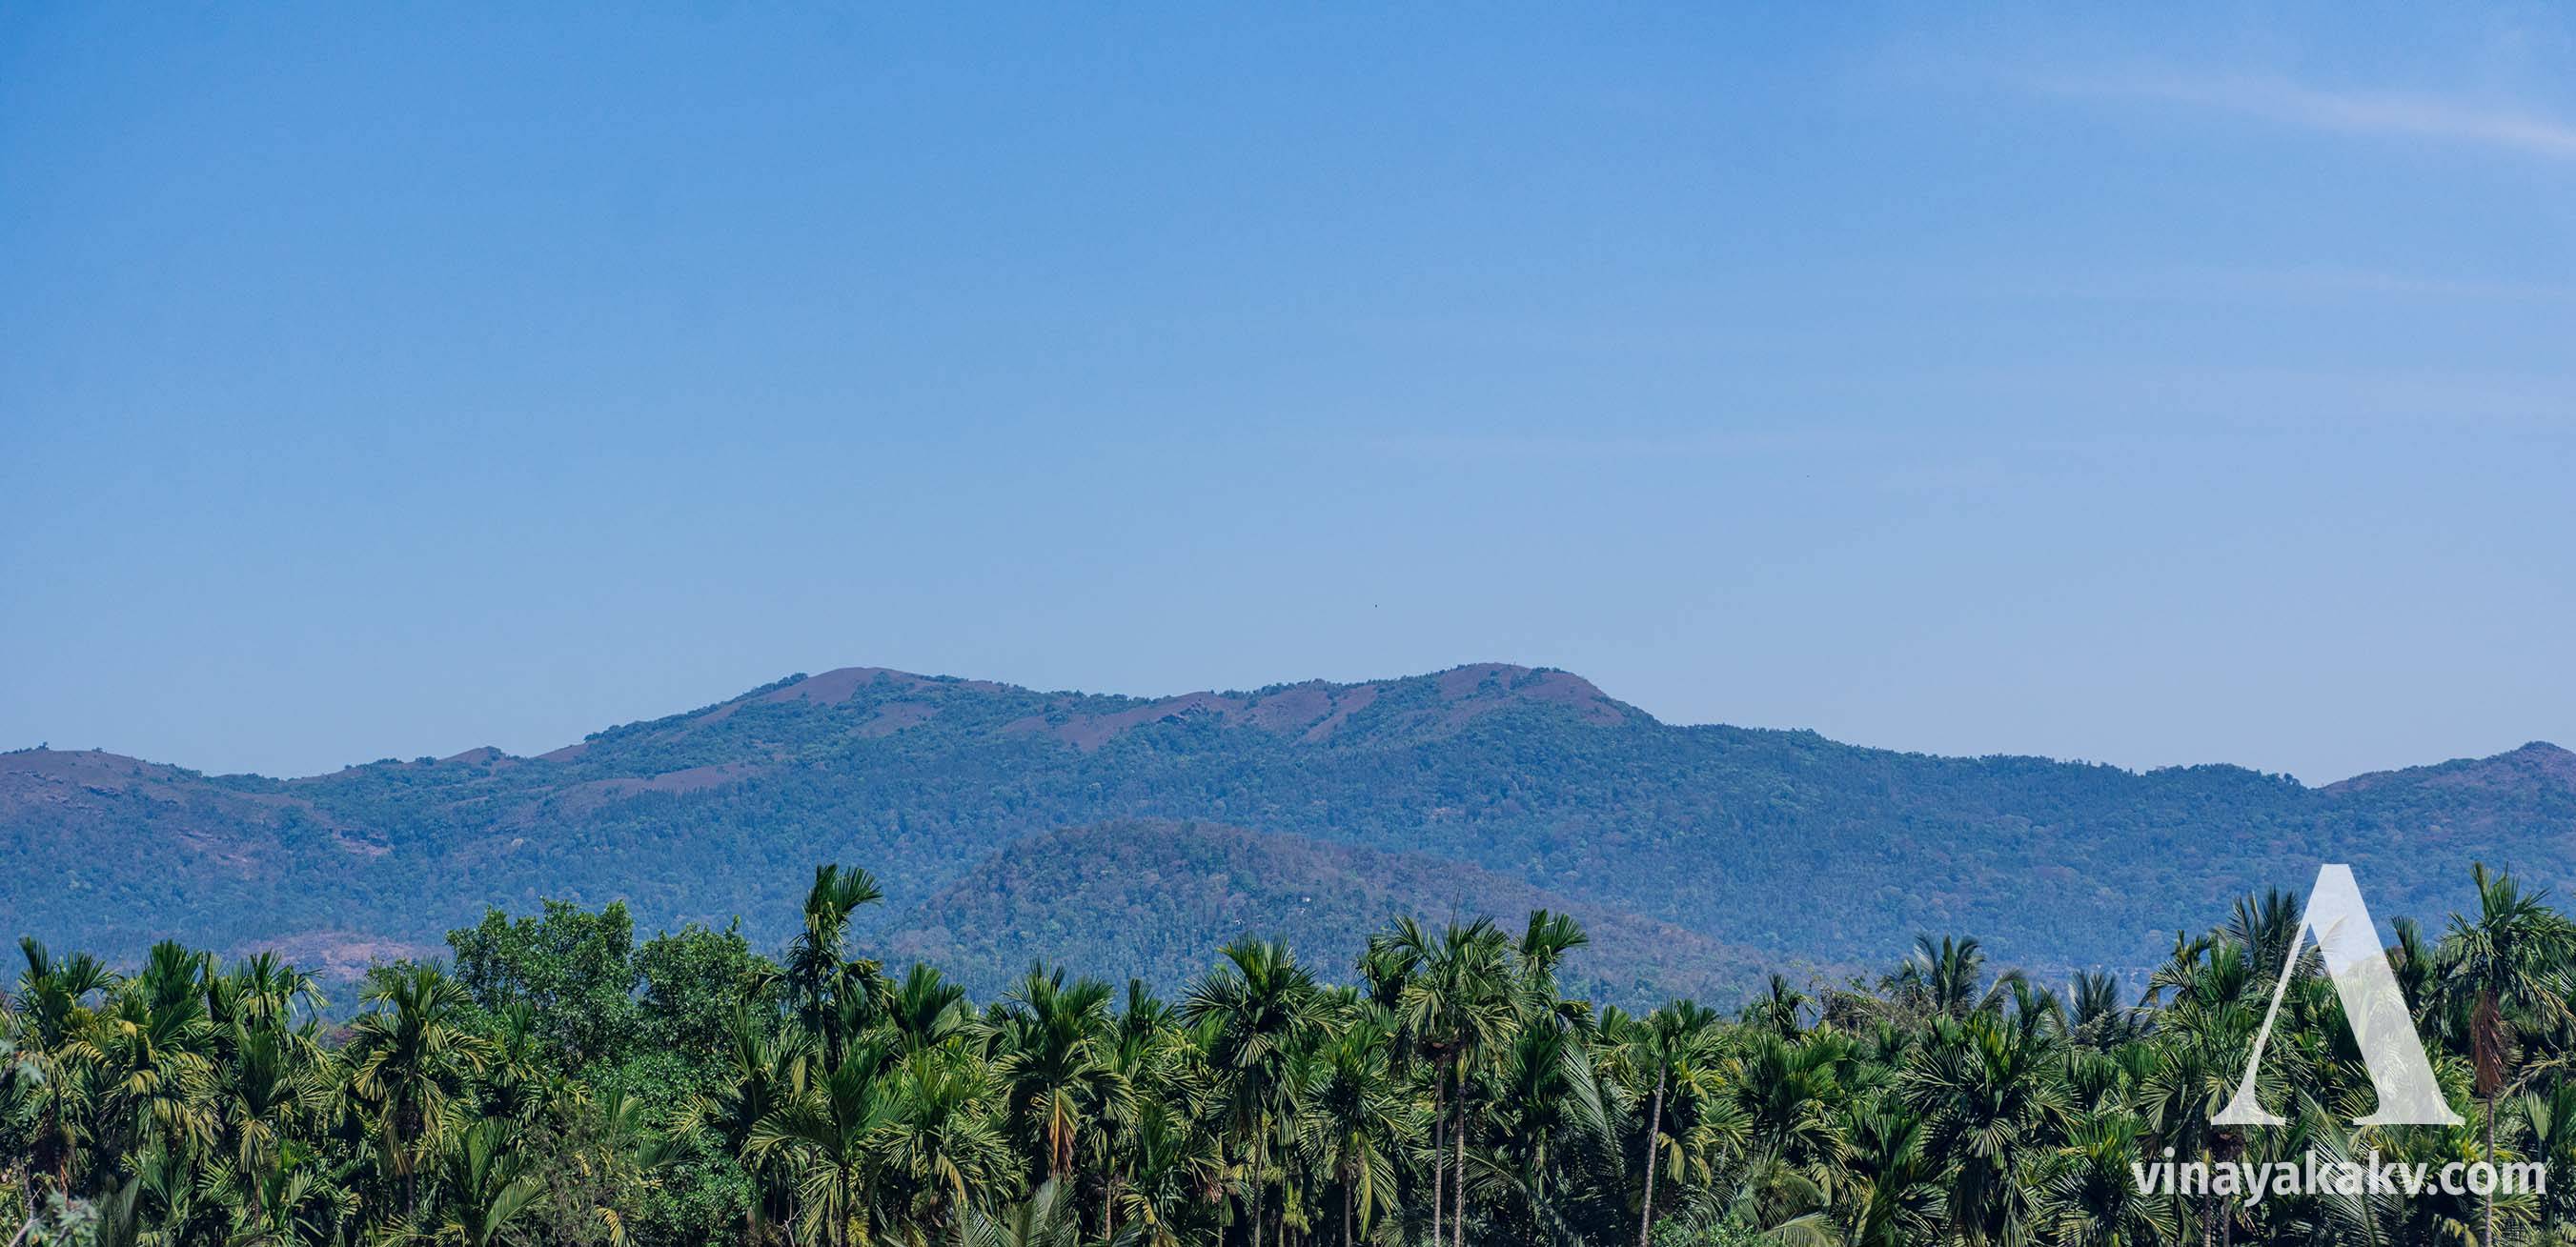 A mixture of deciduous and evergreen forests in the mountains at the last layer, with Areca Nut plantation in the foreground.